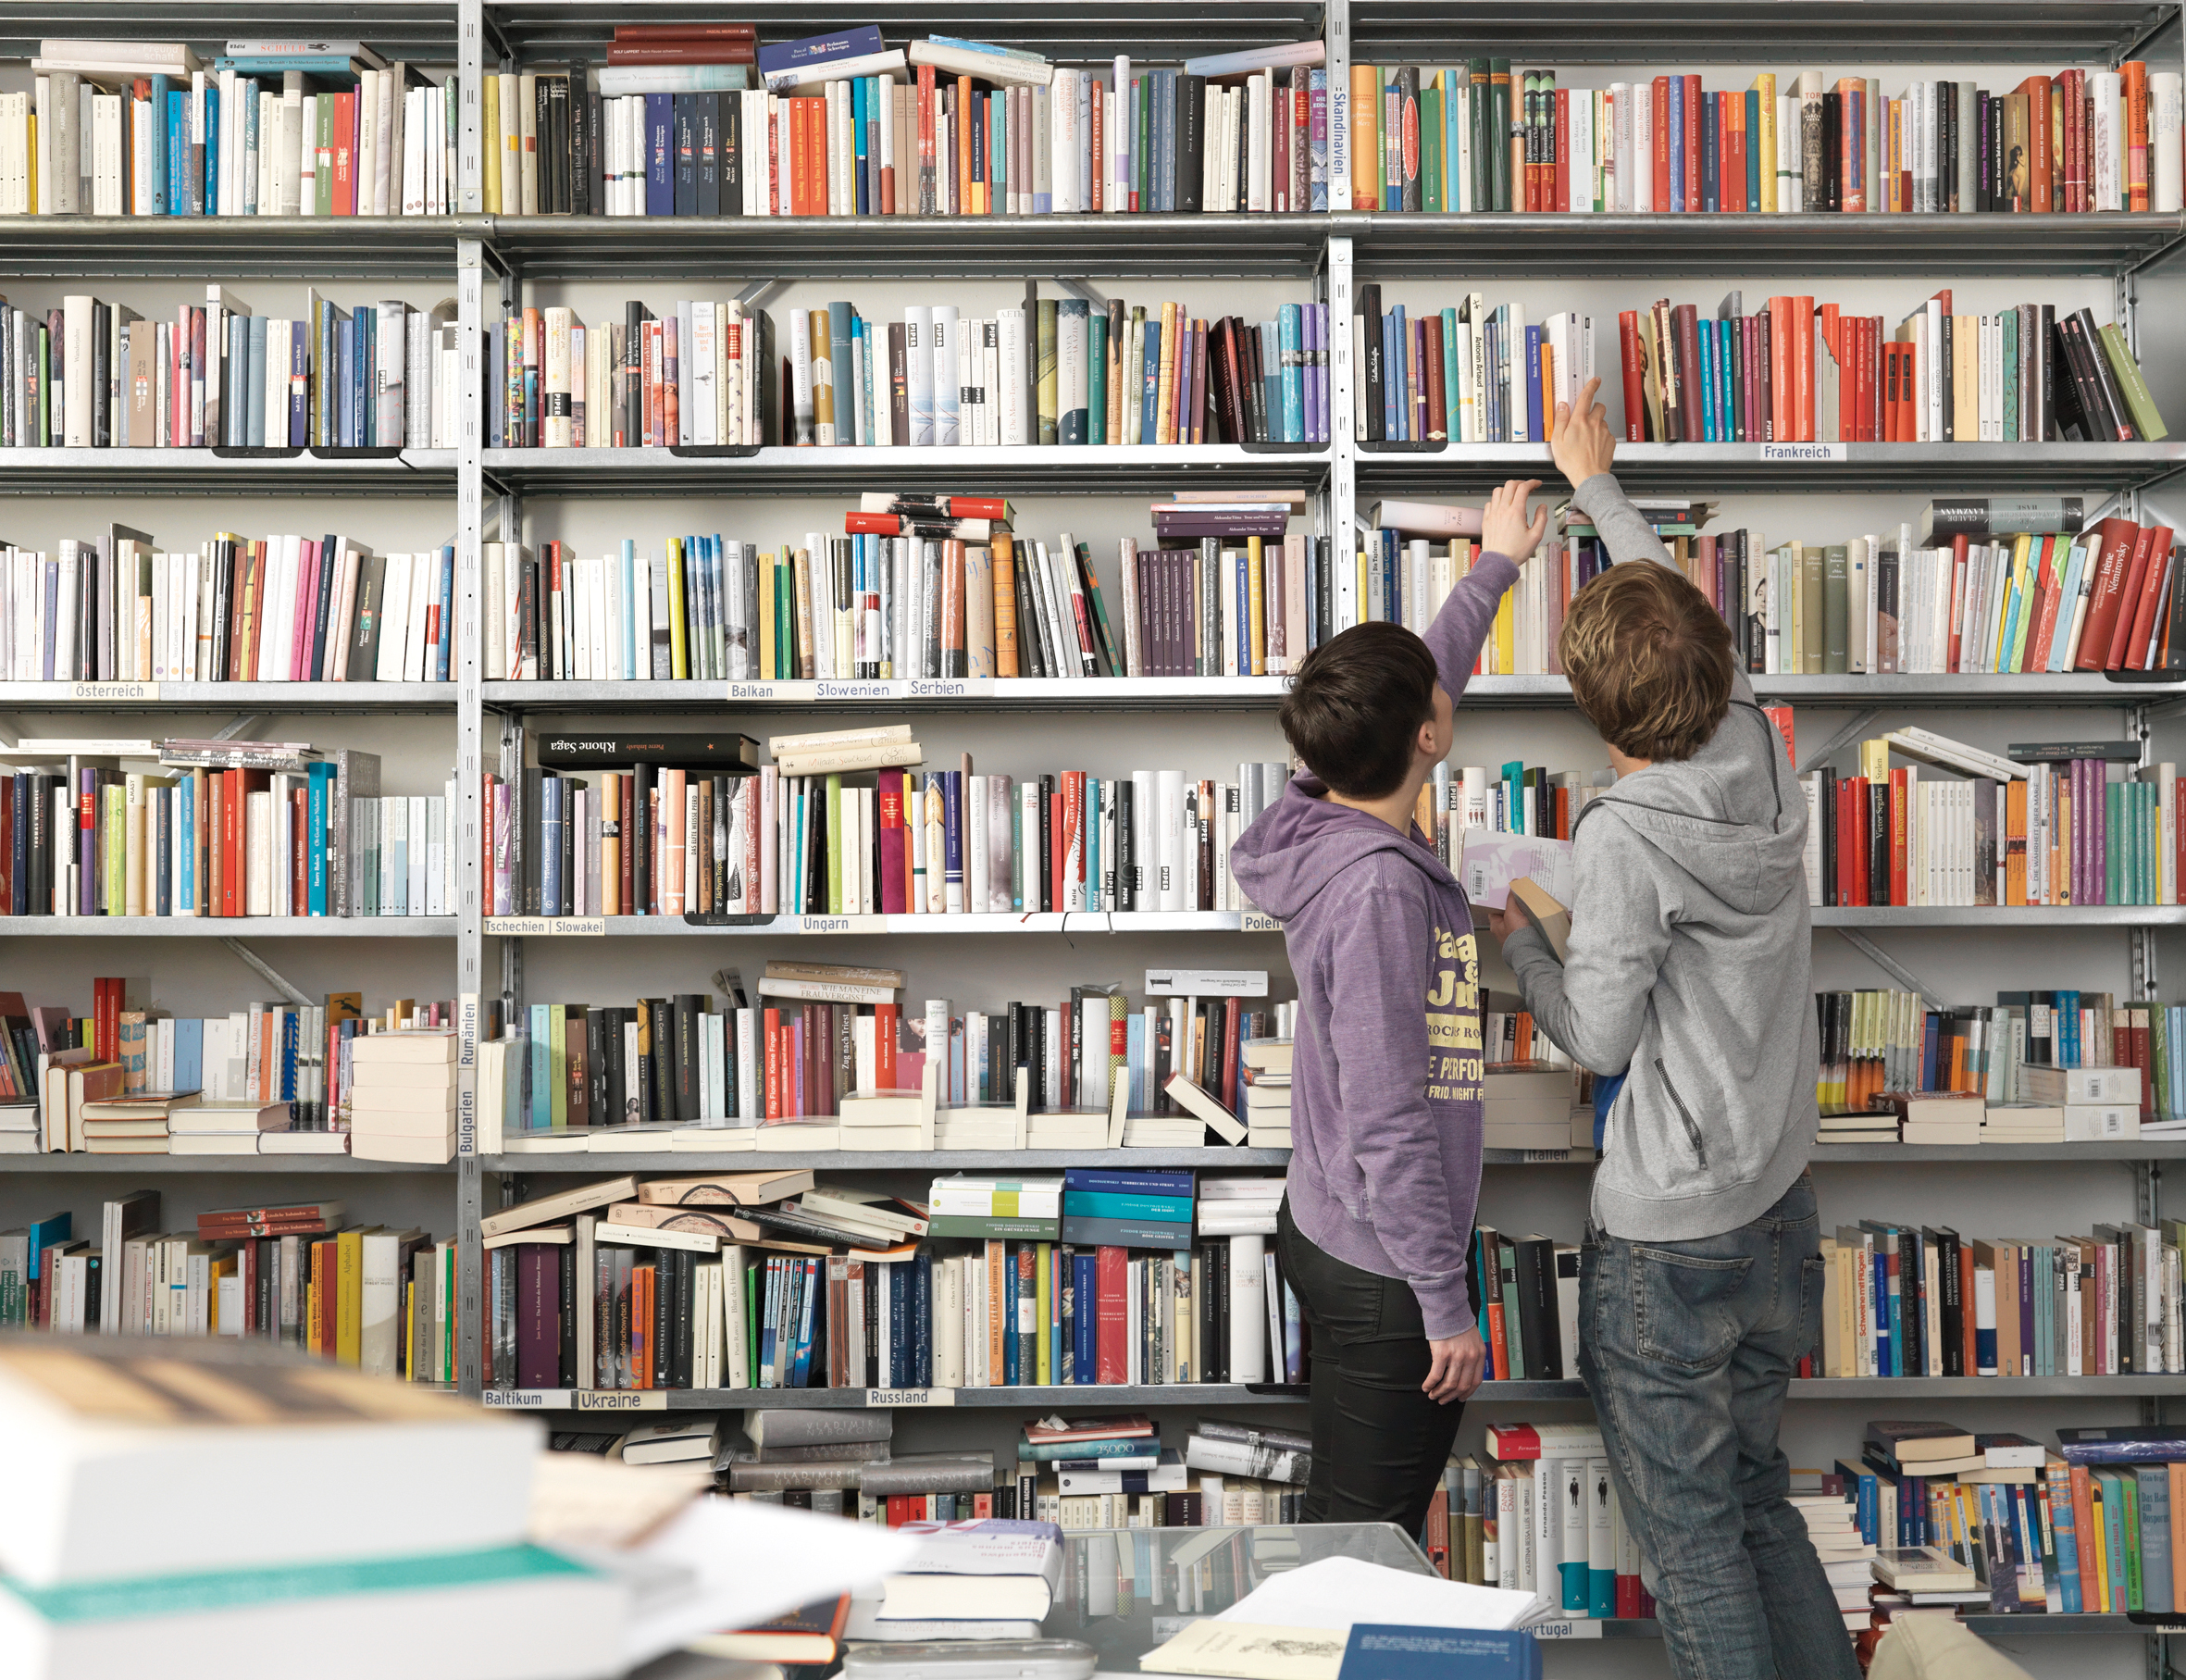 Two people standing in front of a bookshelf